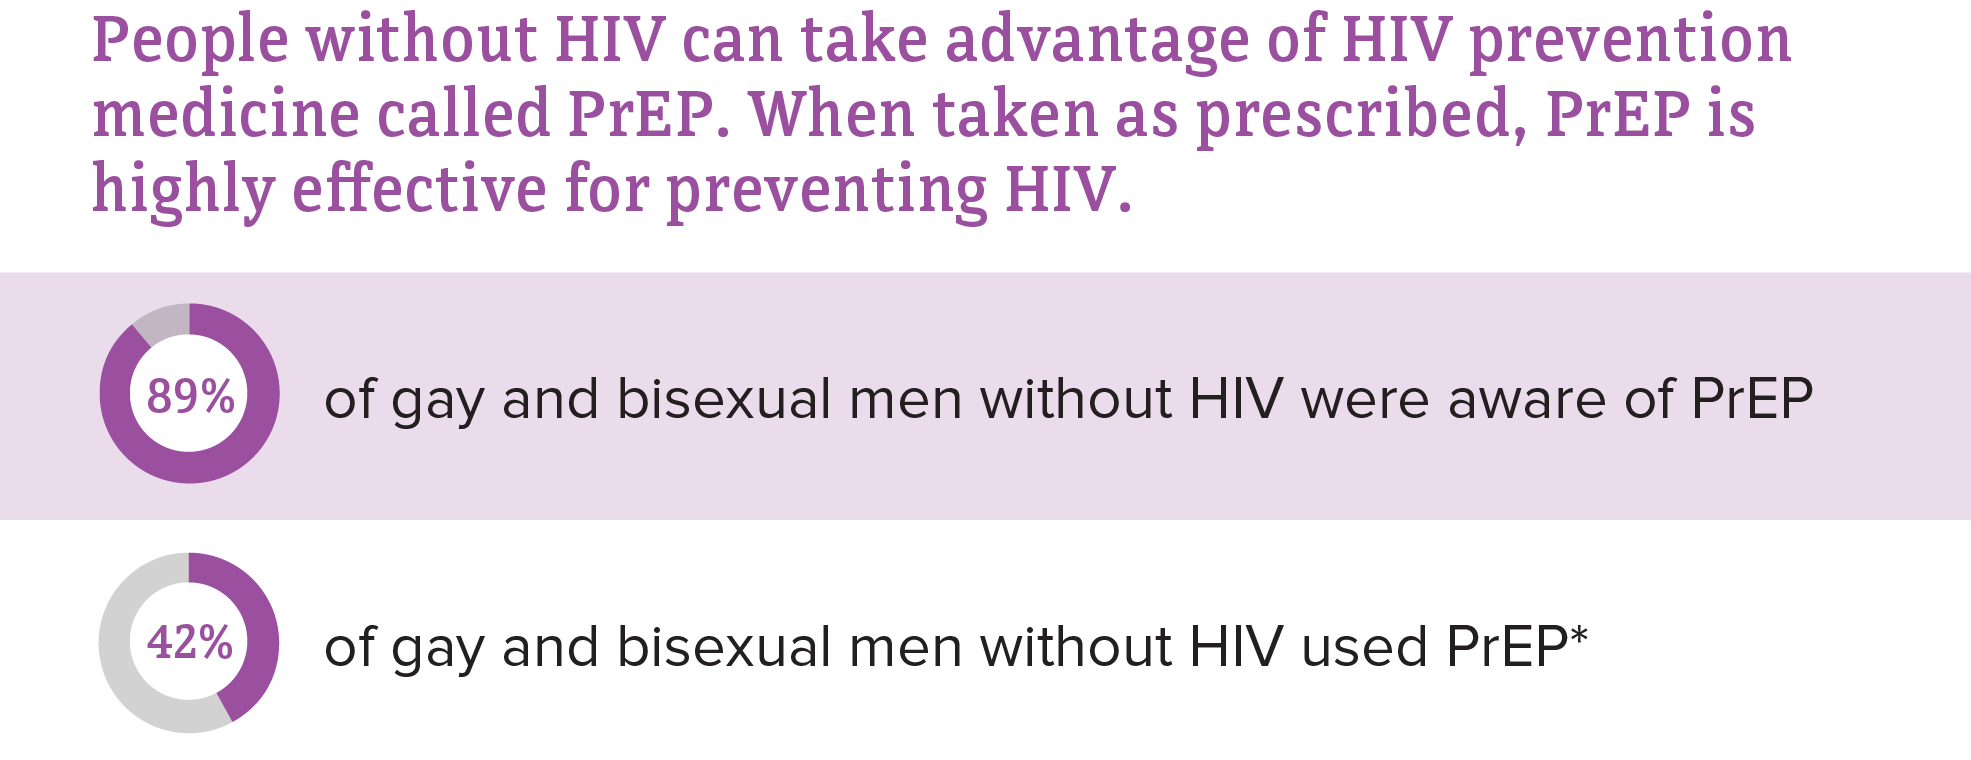 This chart shows the percentage of gay and bisexual men without HIV who were aware of PrEP and who used PrEP.